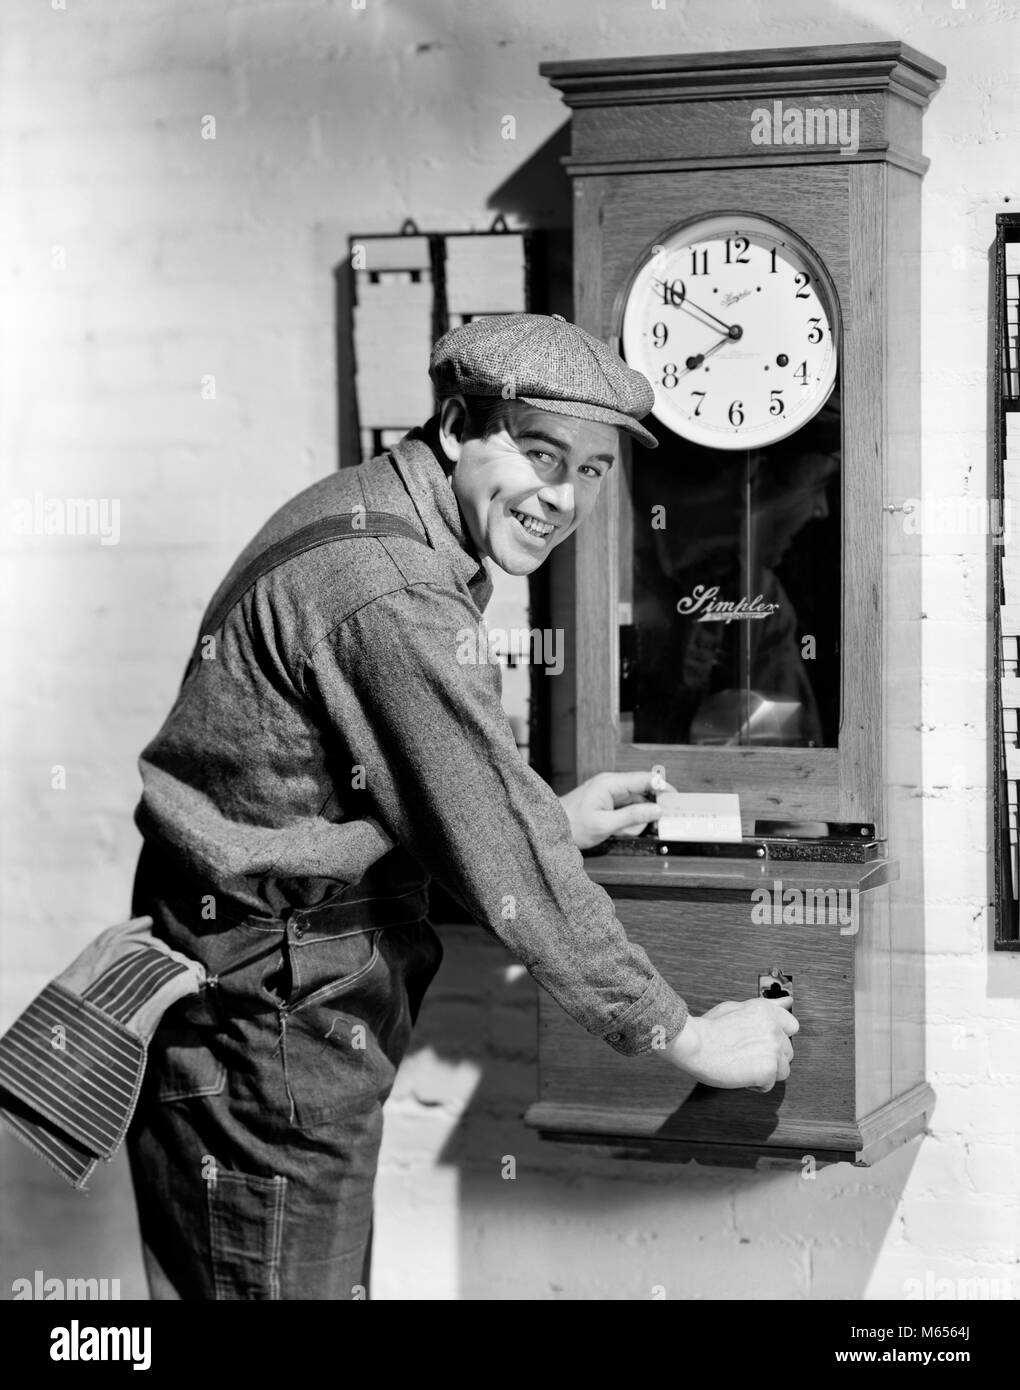 1930s SMILING MAN WORKER PUNCHING IN OUT AT TIME CLOCK LOOKING AT CAMERA - bx001776 CAM001 HARS OVERALLS INDOORS PROFESSION NOSTALGIA EYE CONTACT 25-30 YEARS 30-35 YEARS SKILL OCCUPATION HAPPINESS SKILLS CHEERFUL CAREERS HOURS VERTICAL PUNCHING SHIFT SMILES JOYFUL FRIENDLY EMPLOYEE ARRIVAL MALES MID-ADULT MID-ADULT MAN TIME CLOCK YOUNG ADULT MAN B&W BLACK AND WHITE DEPARTURE LOOKING AT CAMERA OCCUPATIONS OLD FASHIONED PERSONS TIME CARD Stock Photo